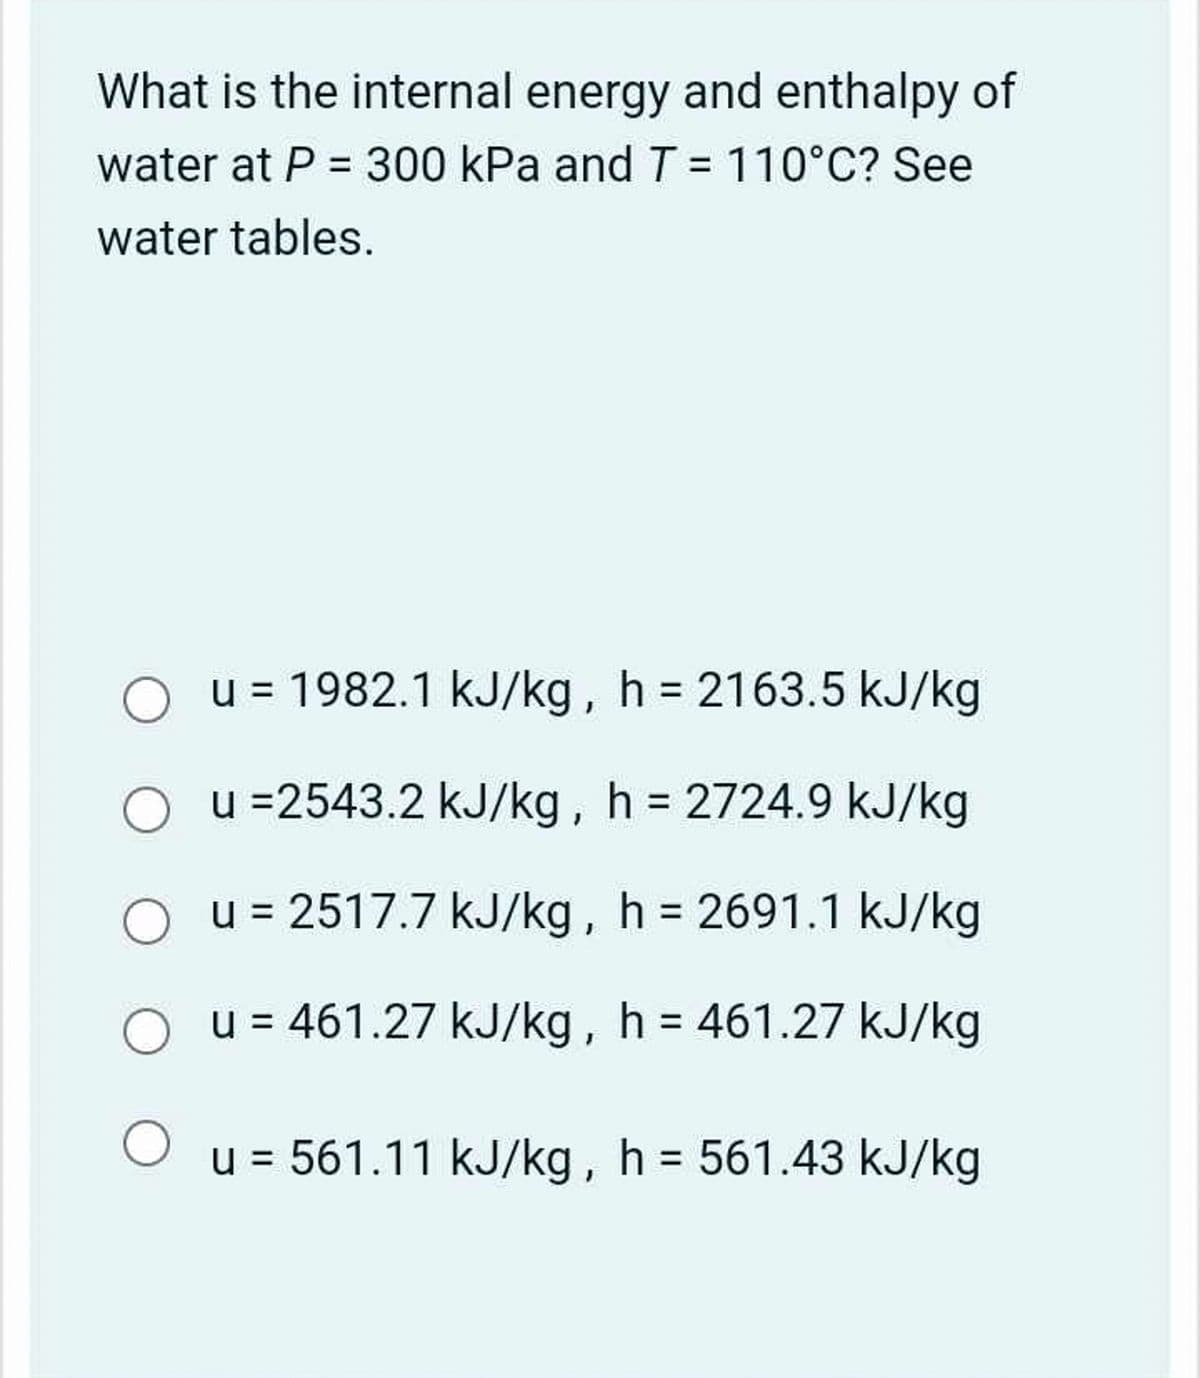 What is the internal energy and enthalpy of
water at P = 300 kPa and T = 110°C? See
water tables.
О
u = 1982.1 kJ/kg, h = 2163.5 kJ/kg
u =2543.2 kJ/kg, h = 2724.9 kJ/kg
u = 2517.7 kJ/kg, h = 2691.1 kJ/kg
u = 461.27 kJ/kg, h = 461.27 kJ/kg
u = 561.11 kJ/kg, h = 561.43 kJ/kg